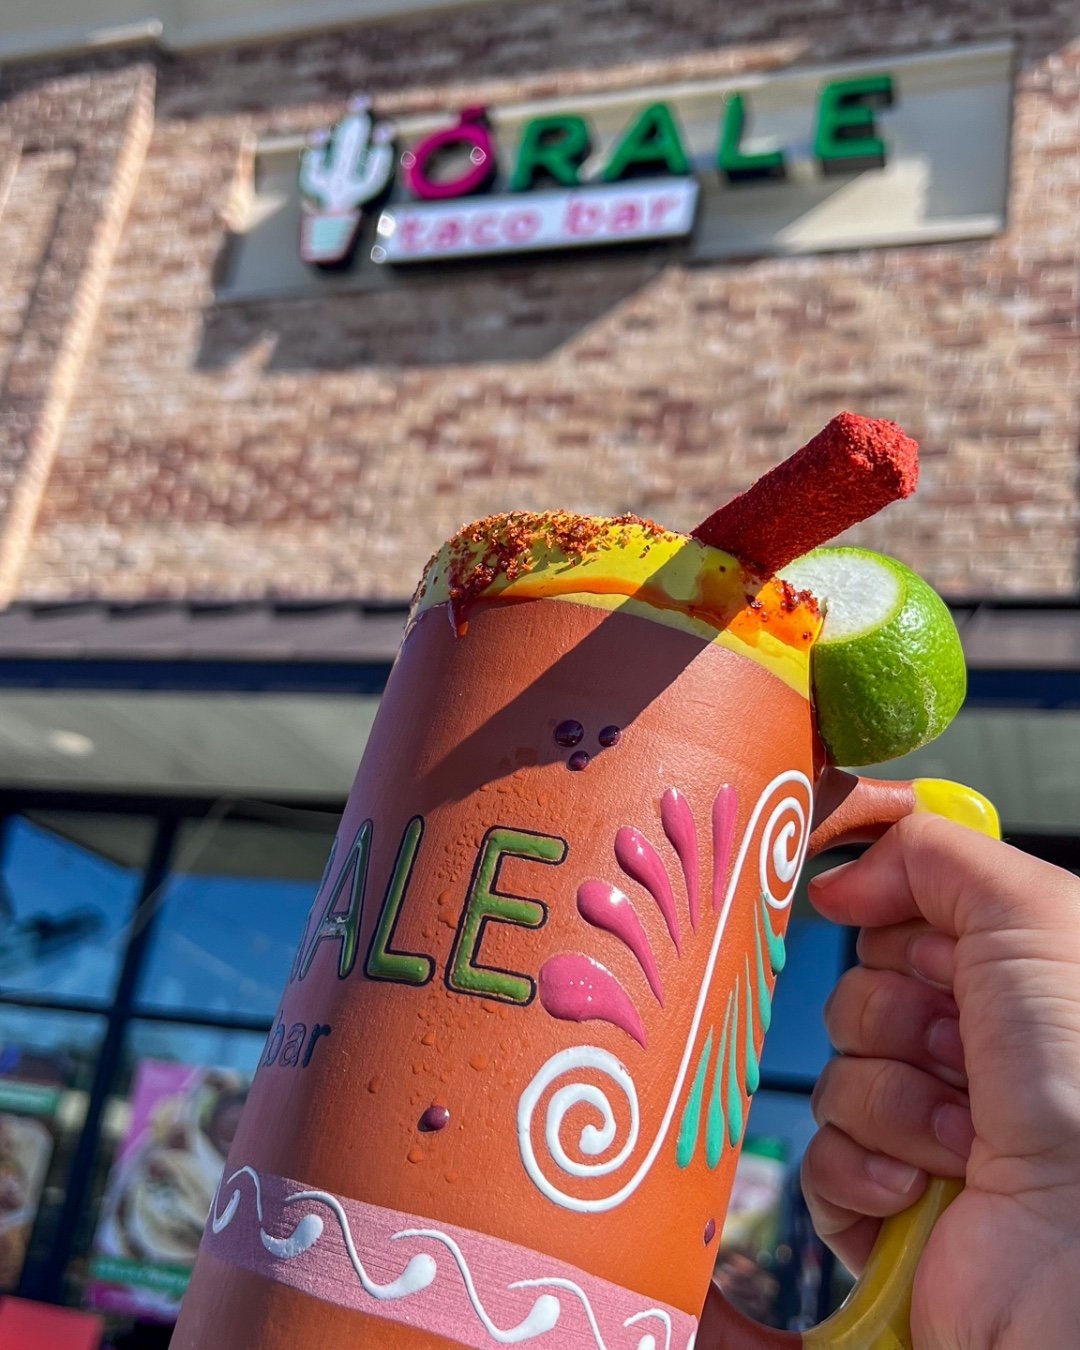 It&rsquo;s a good day to get Orale! 😏

📍1760 Old Morganton Rd, Southern Pines, NC 2838

#oraletacobar #taqueria #southernpines #mexicanfood #comidamexicana #southernpinesfood #southernpinesnc